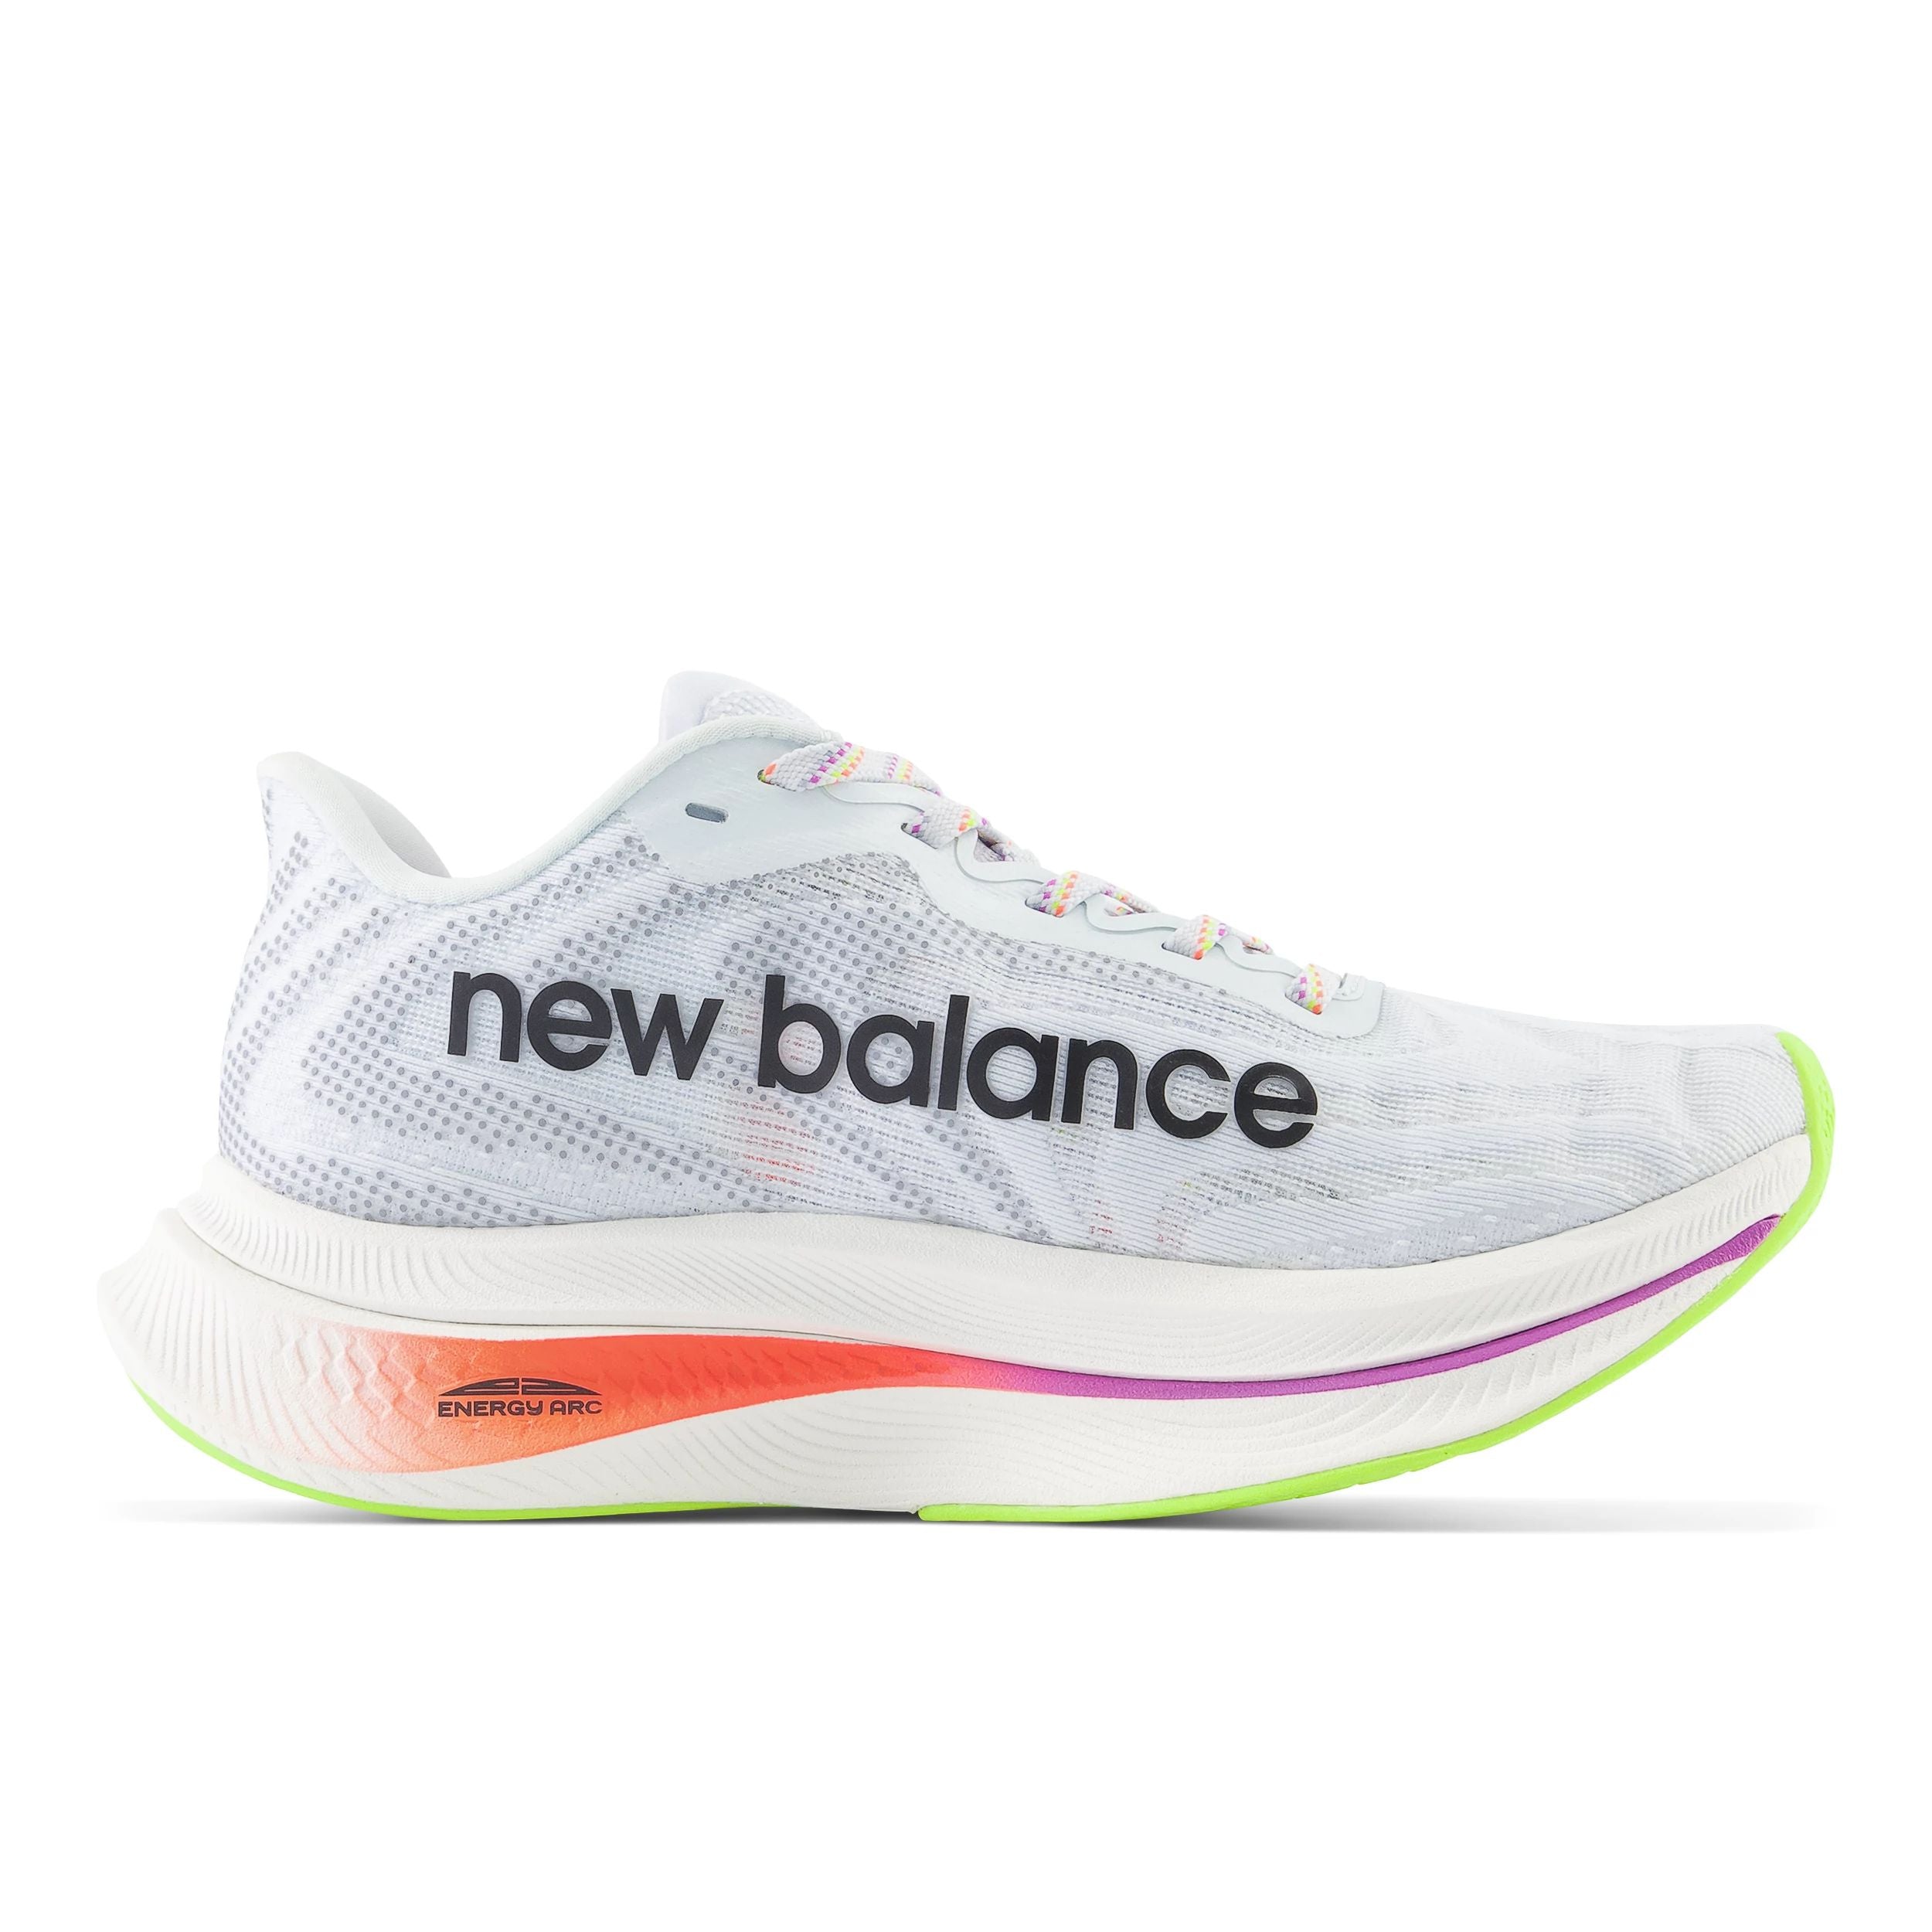 NEW BALANCE MEN'S FUELCELL SUPERCOMP TRAINER V2 - D - LG3 ICE BLUE 